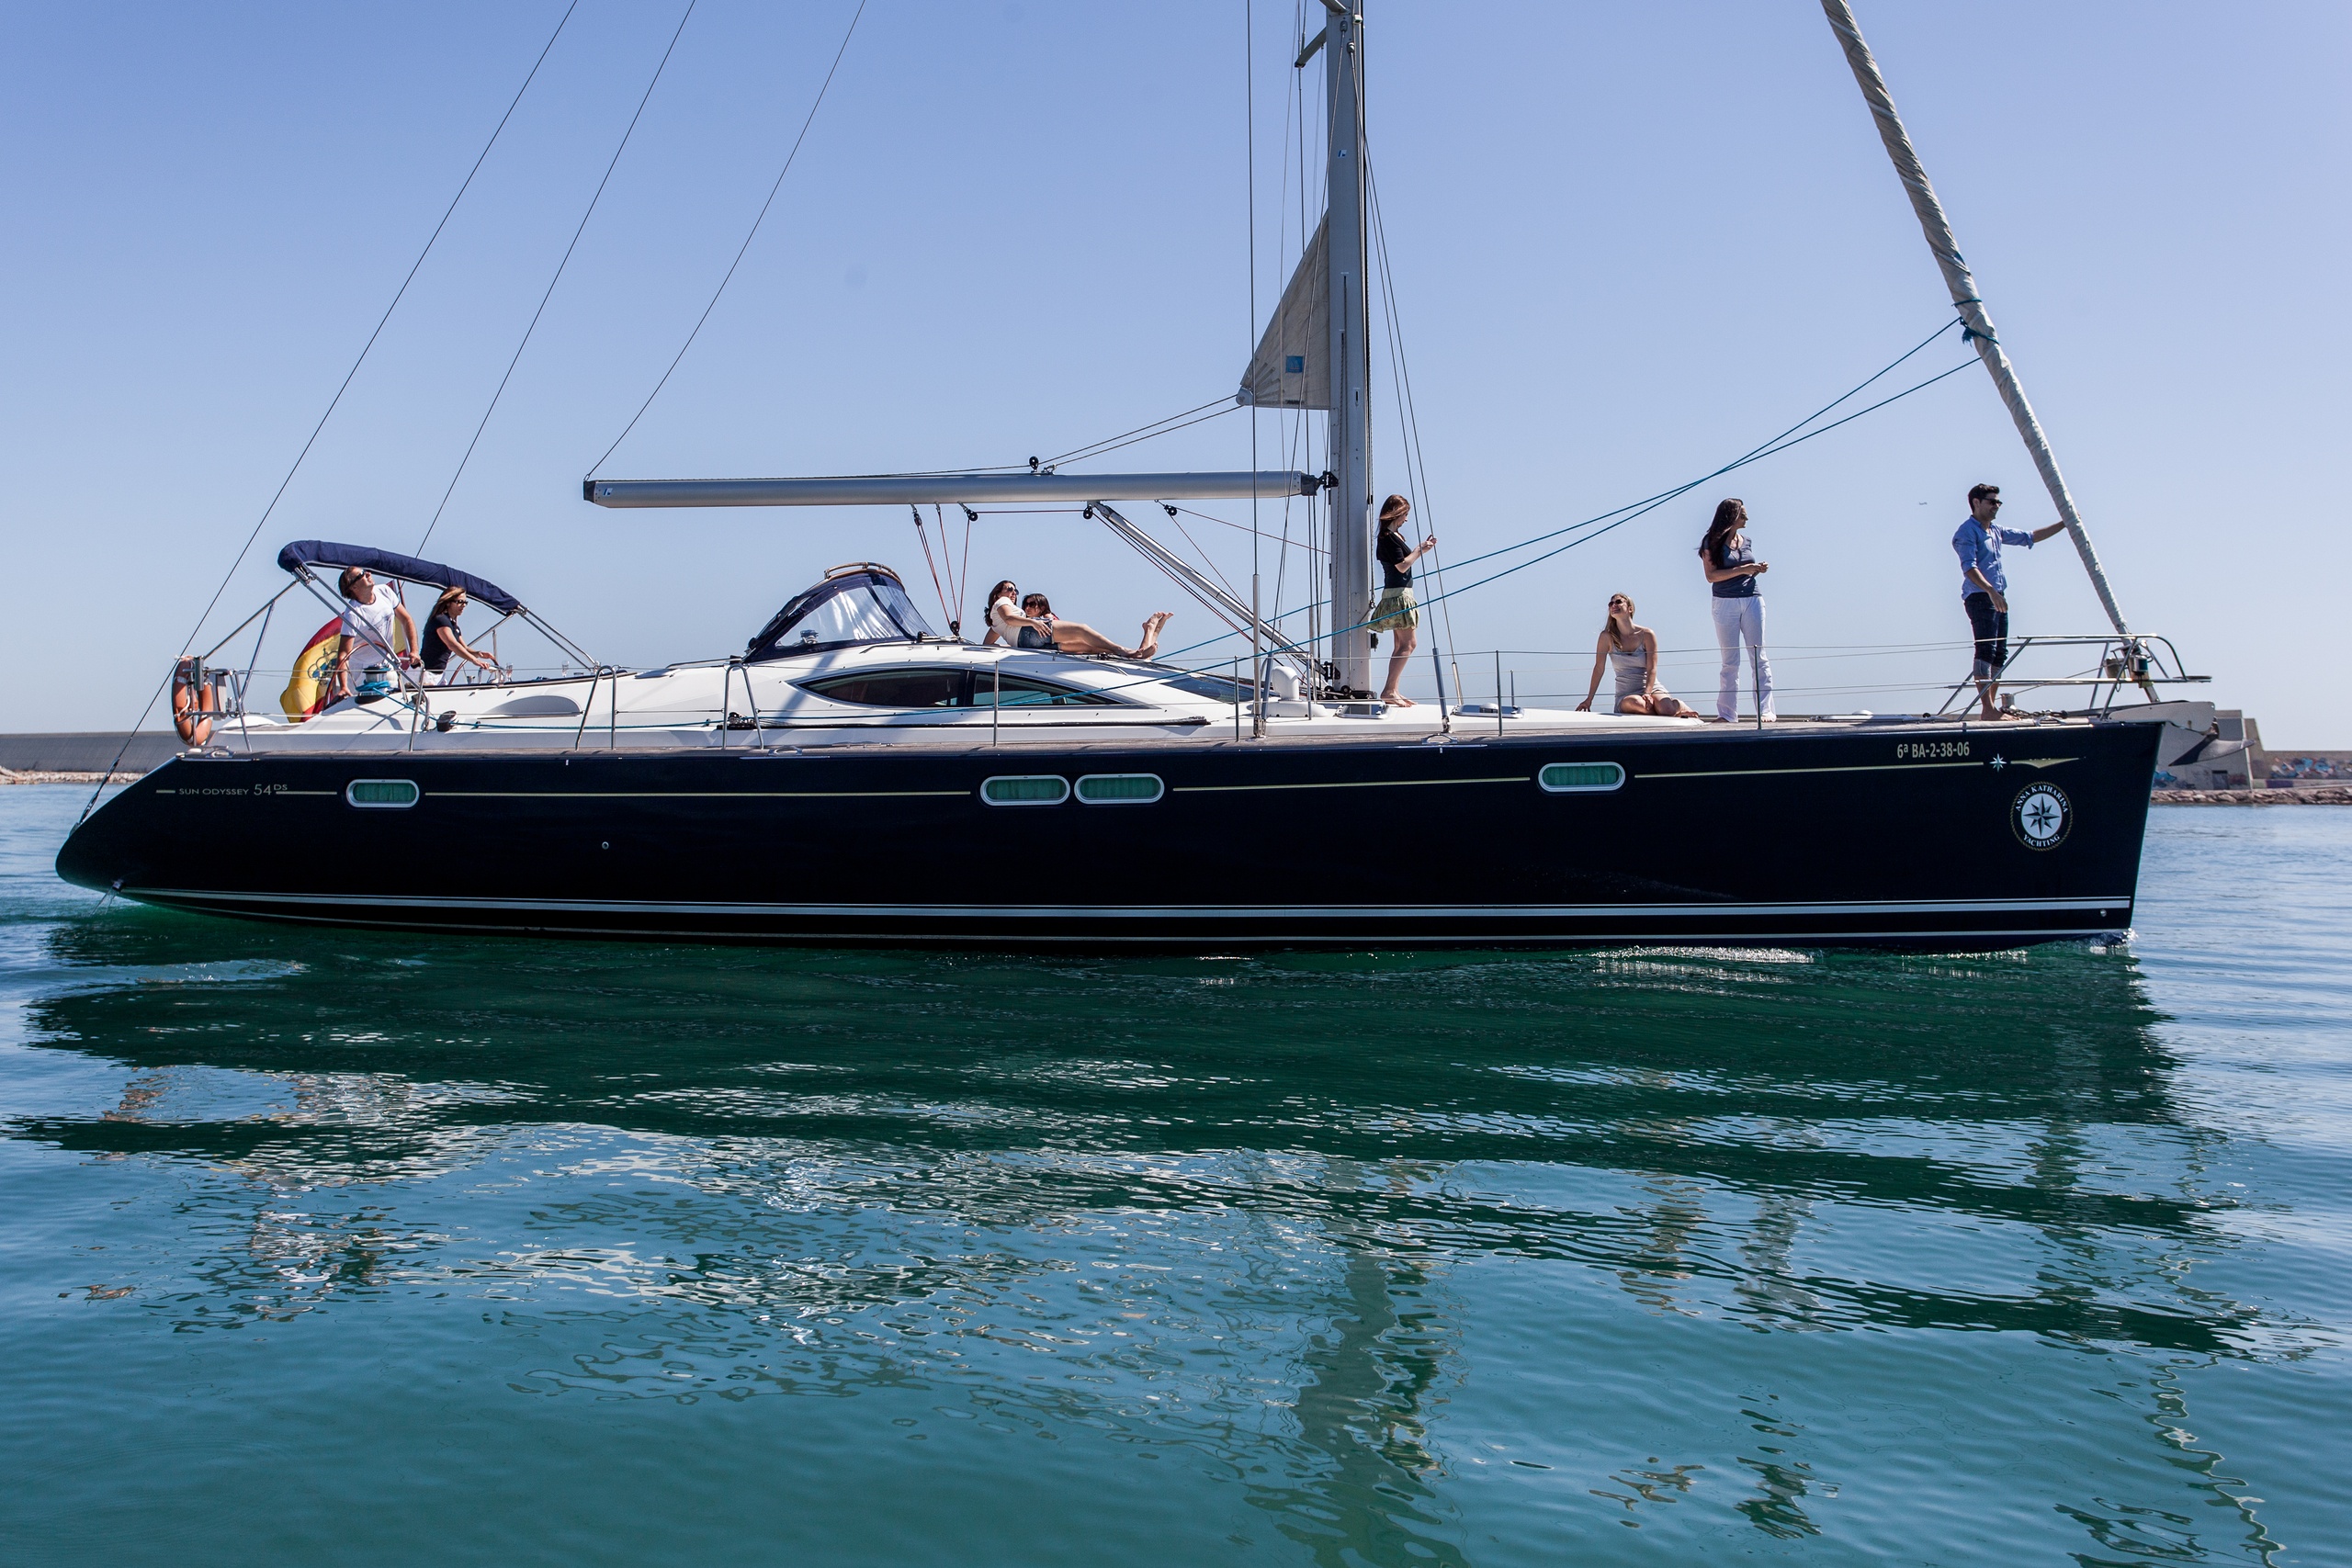 Private Luxurious Sailing Tour in Barcelona